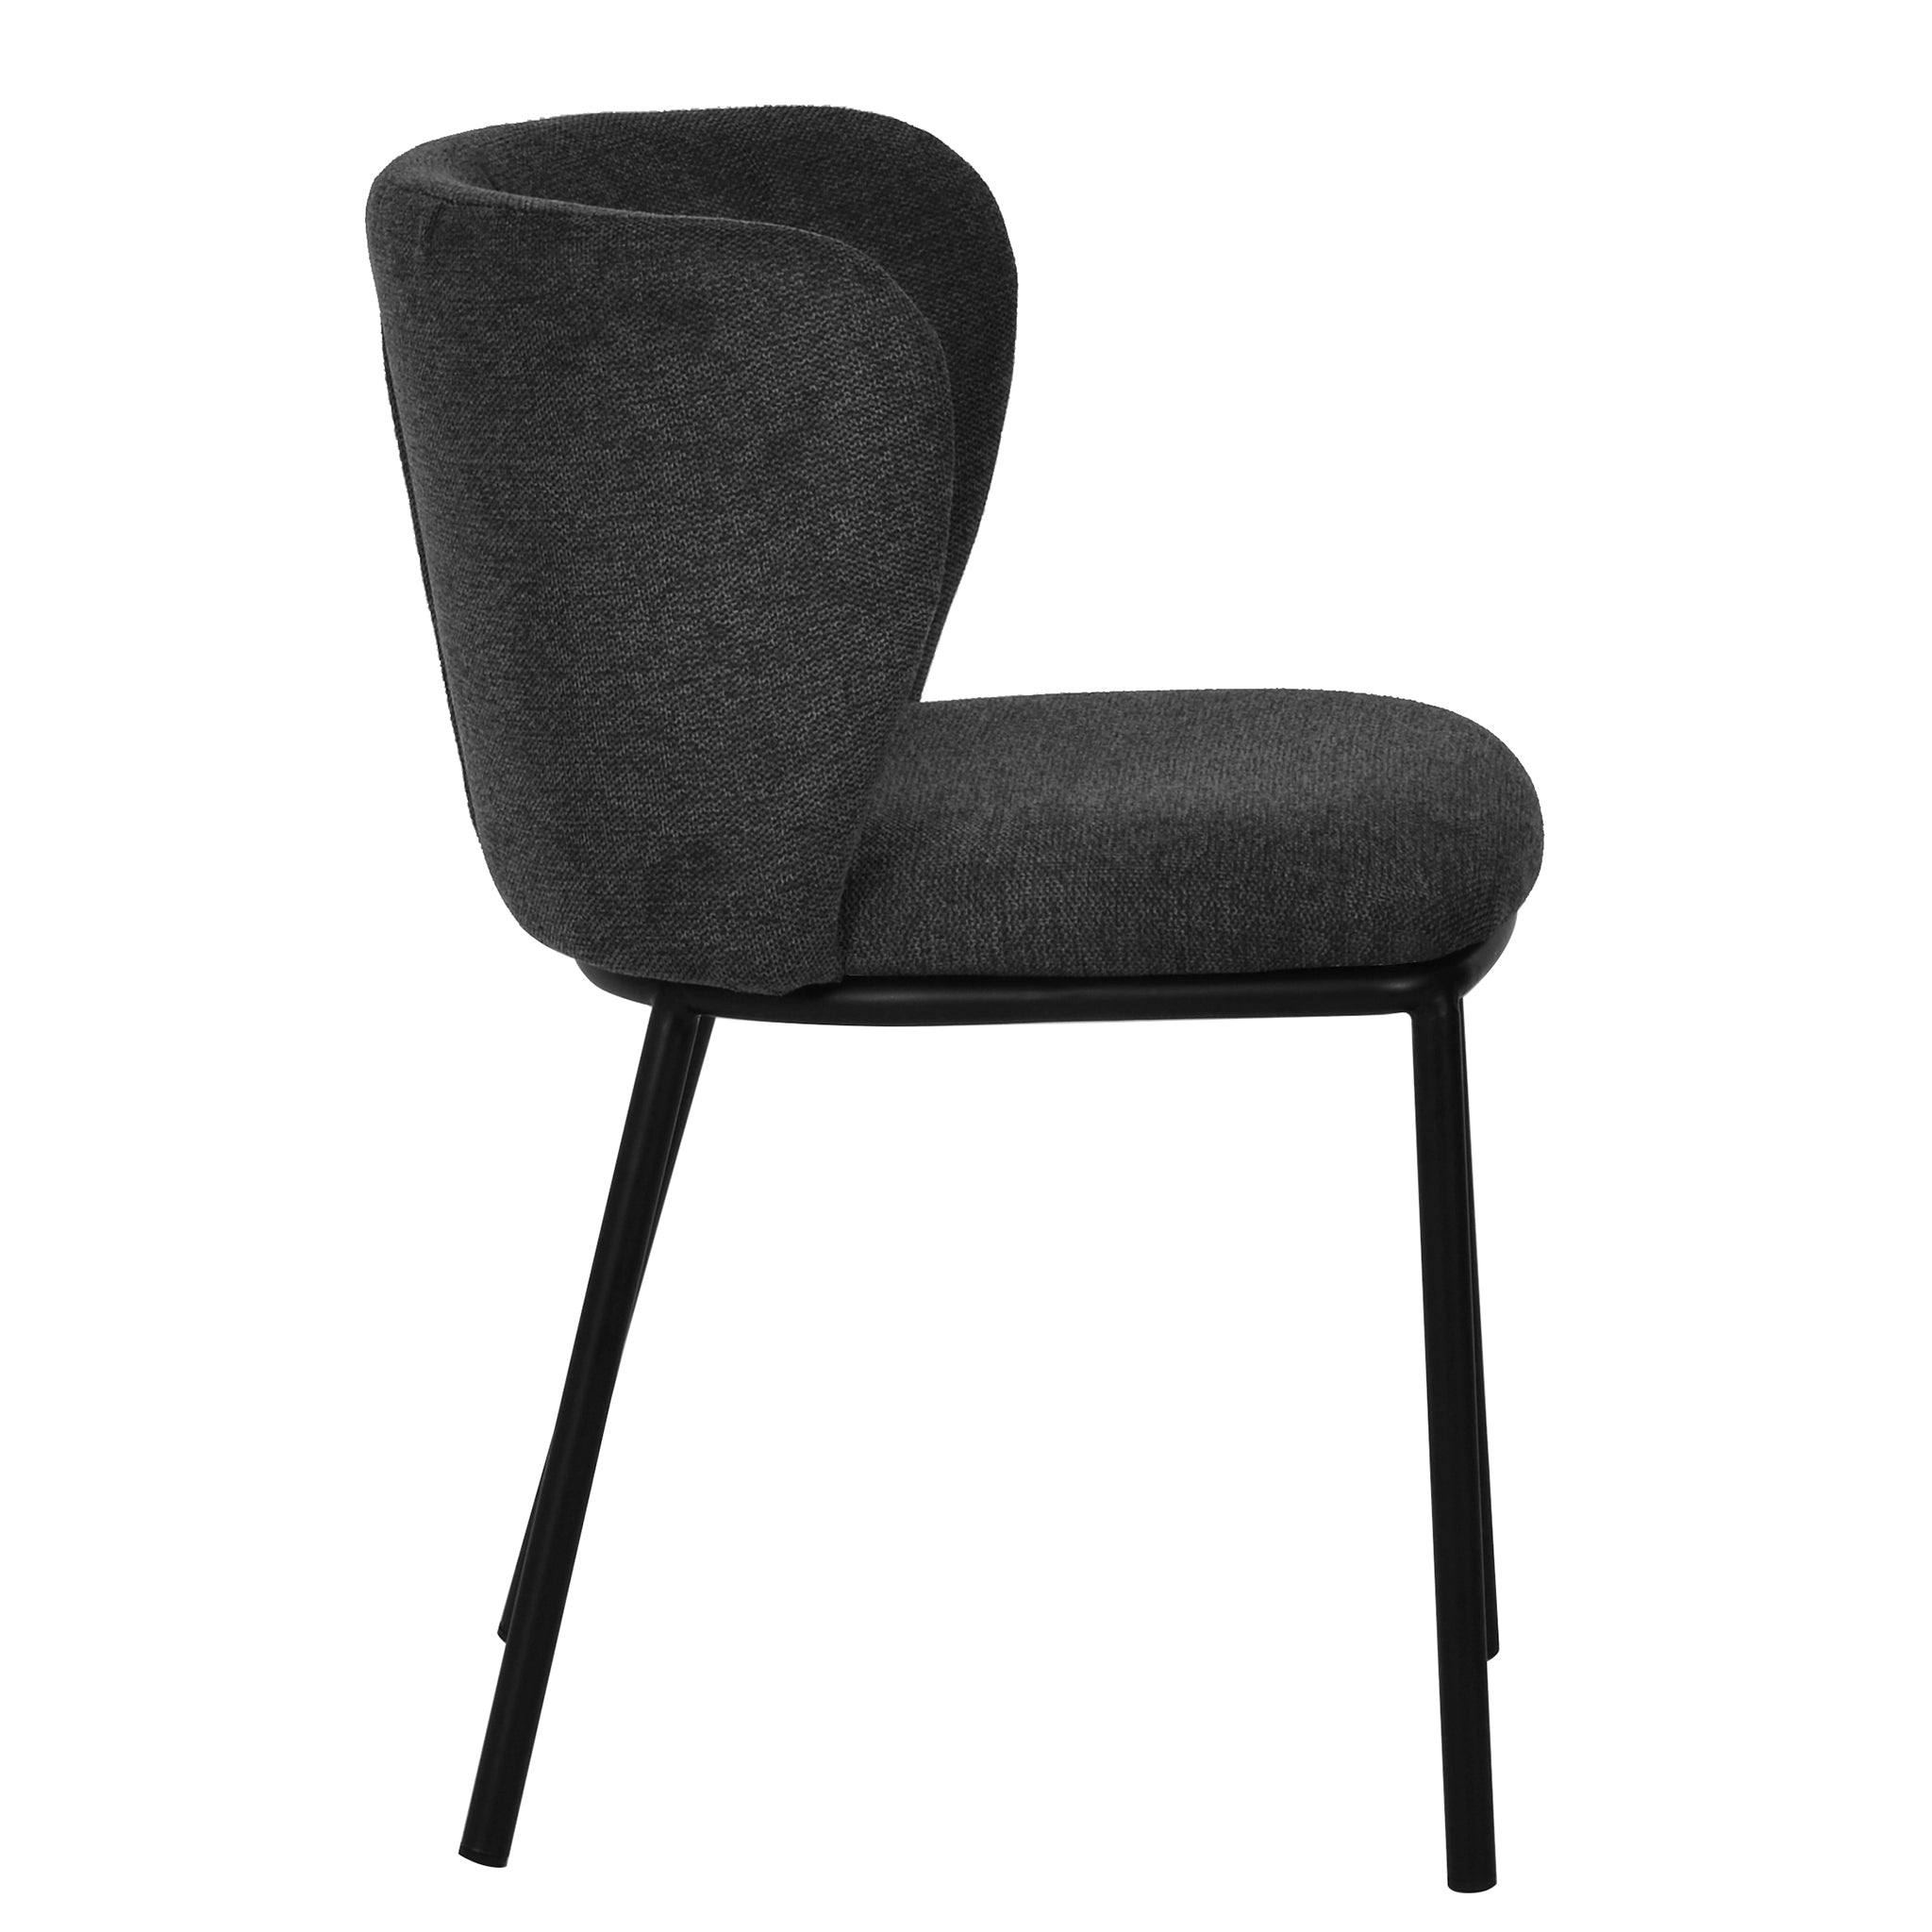 Set of 2 James Fabric Dining Chair - Charcoal Grey - Dining Chairs